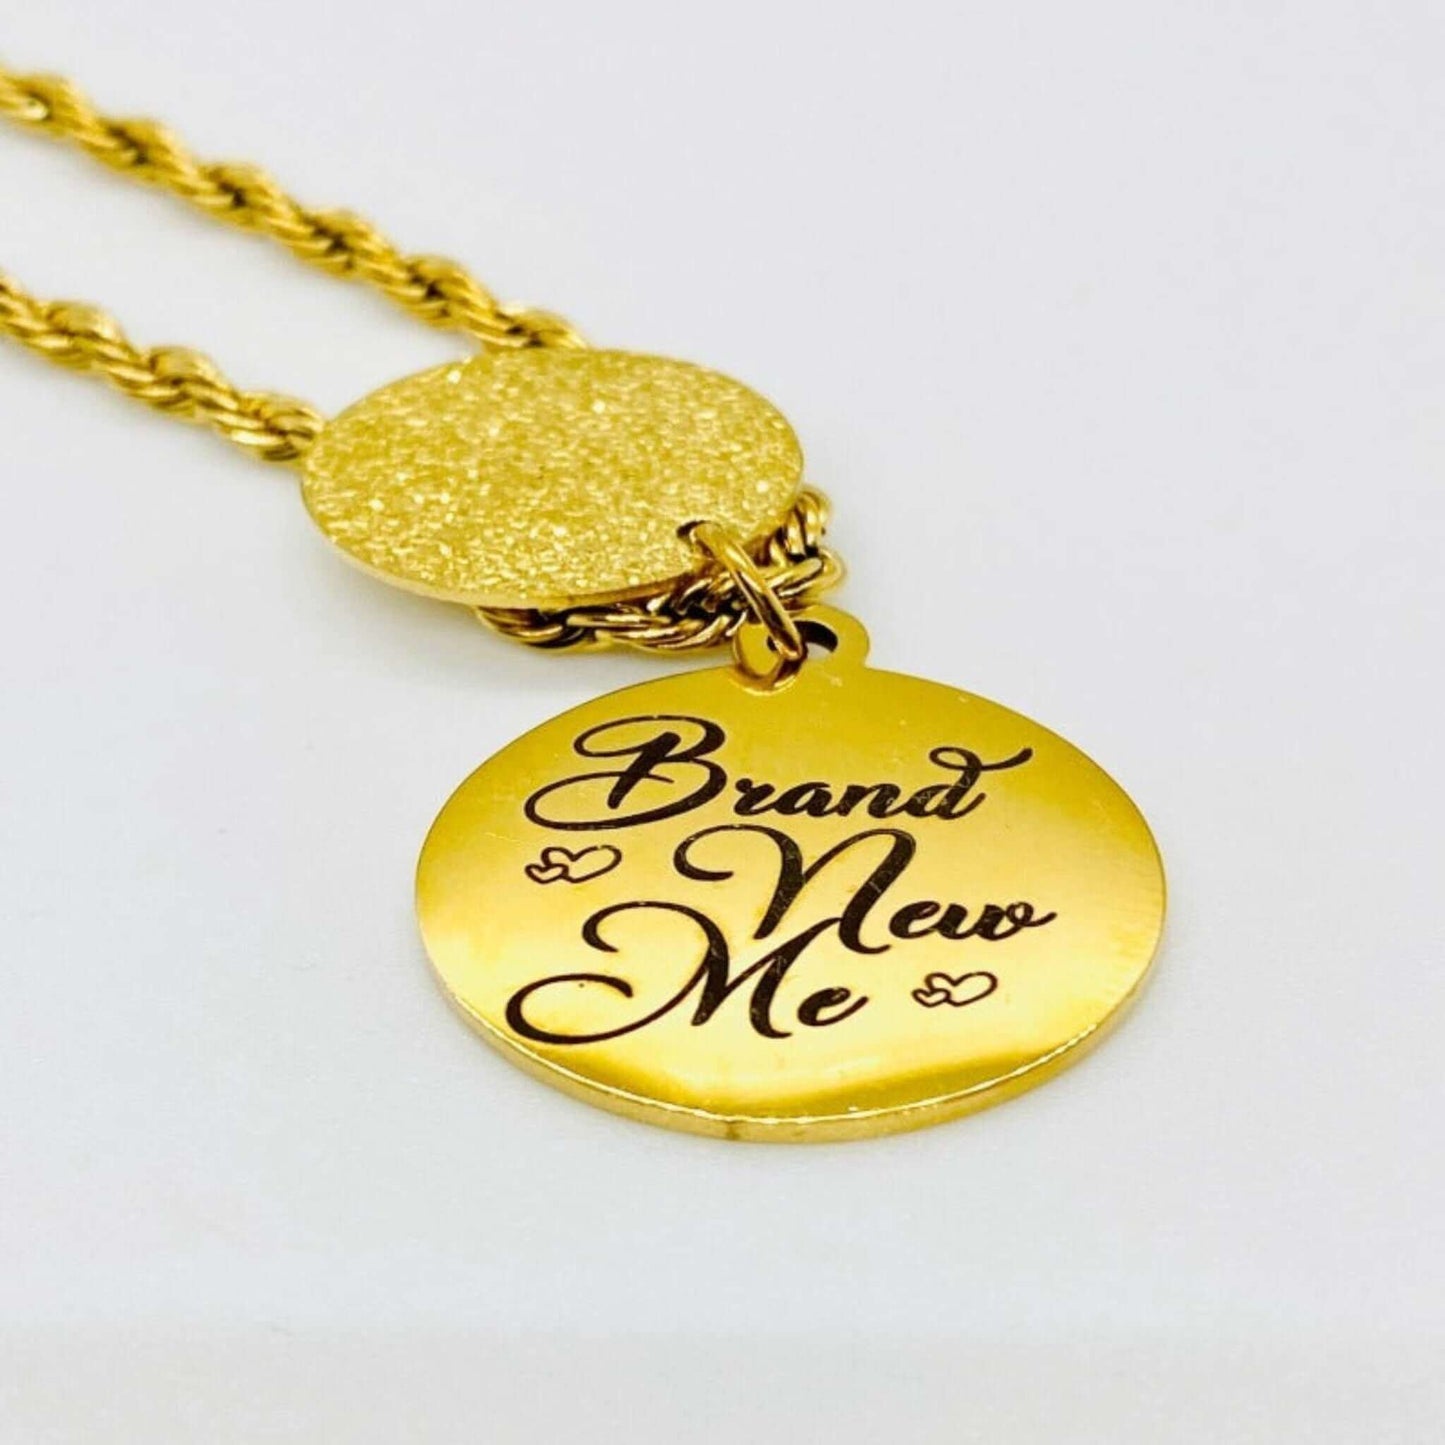 Brand New Me Necklace